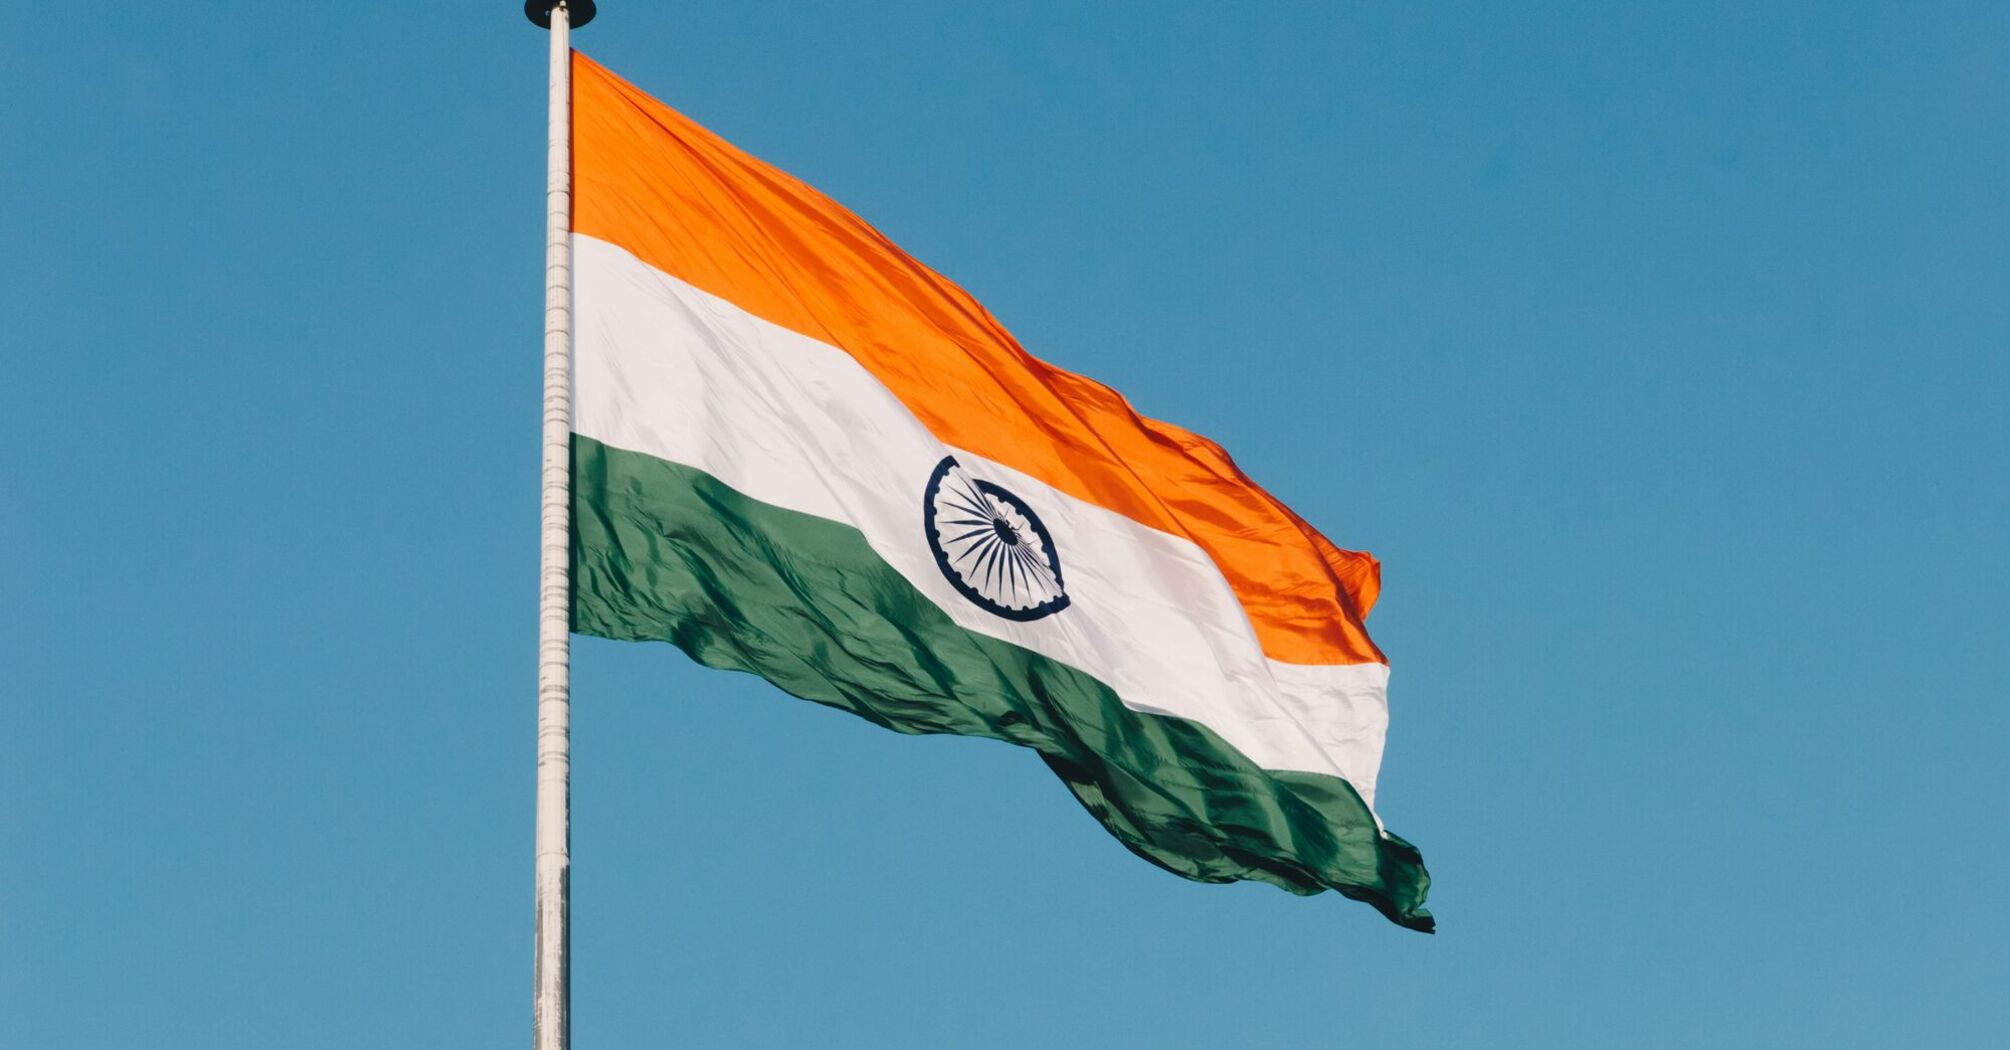 The Indian flag